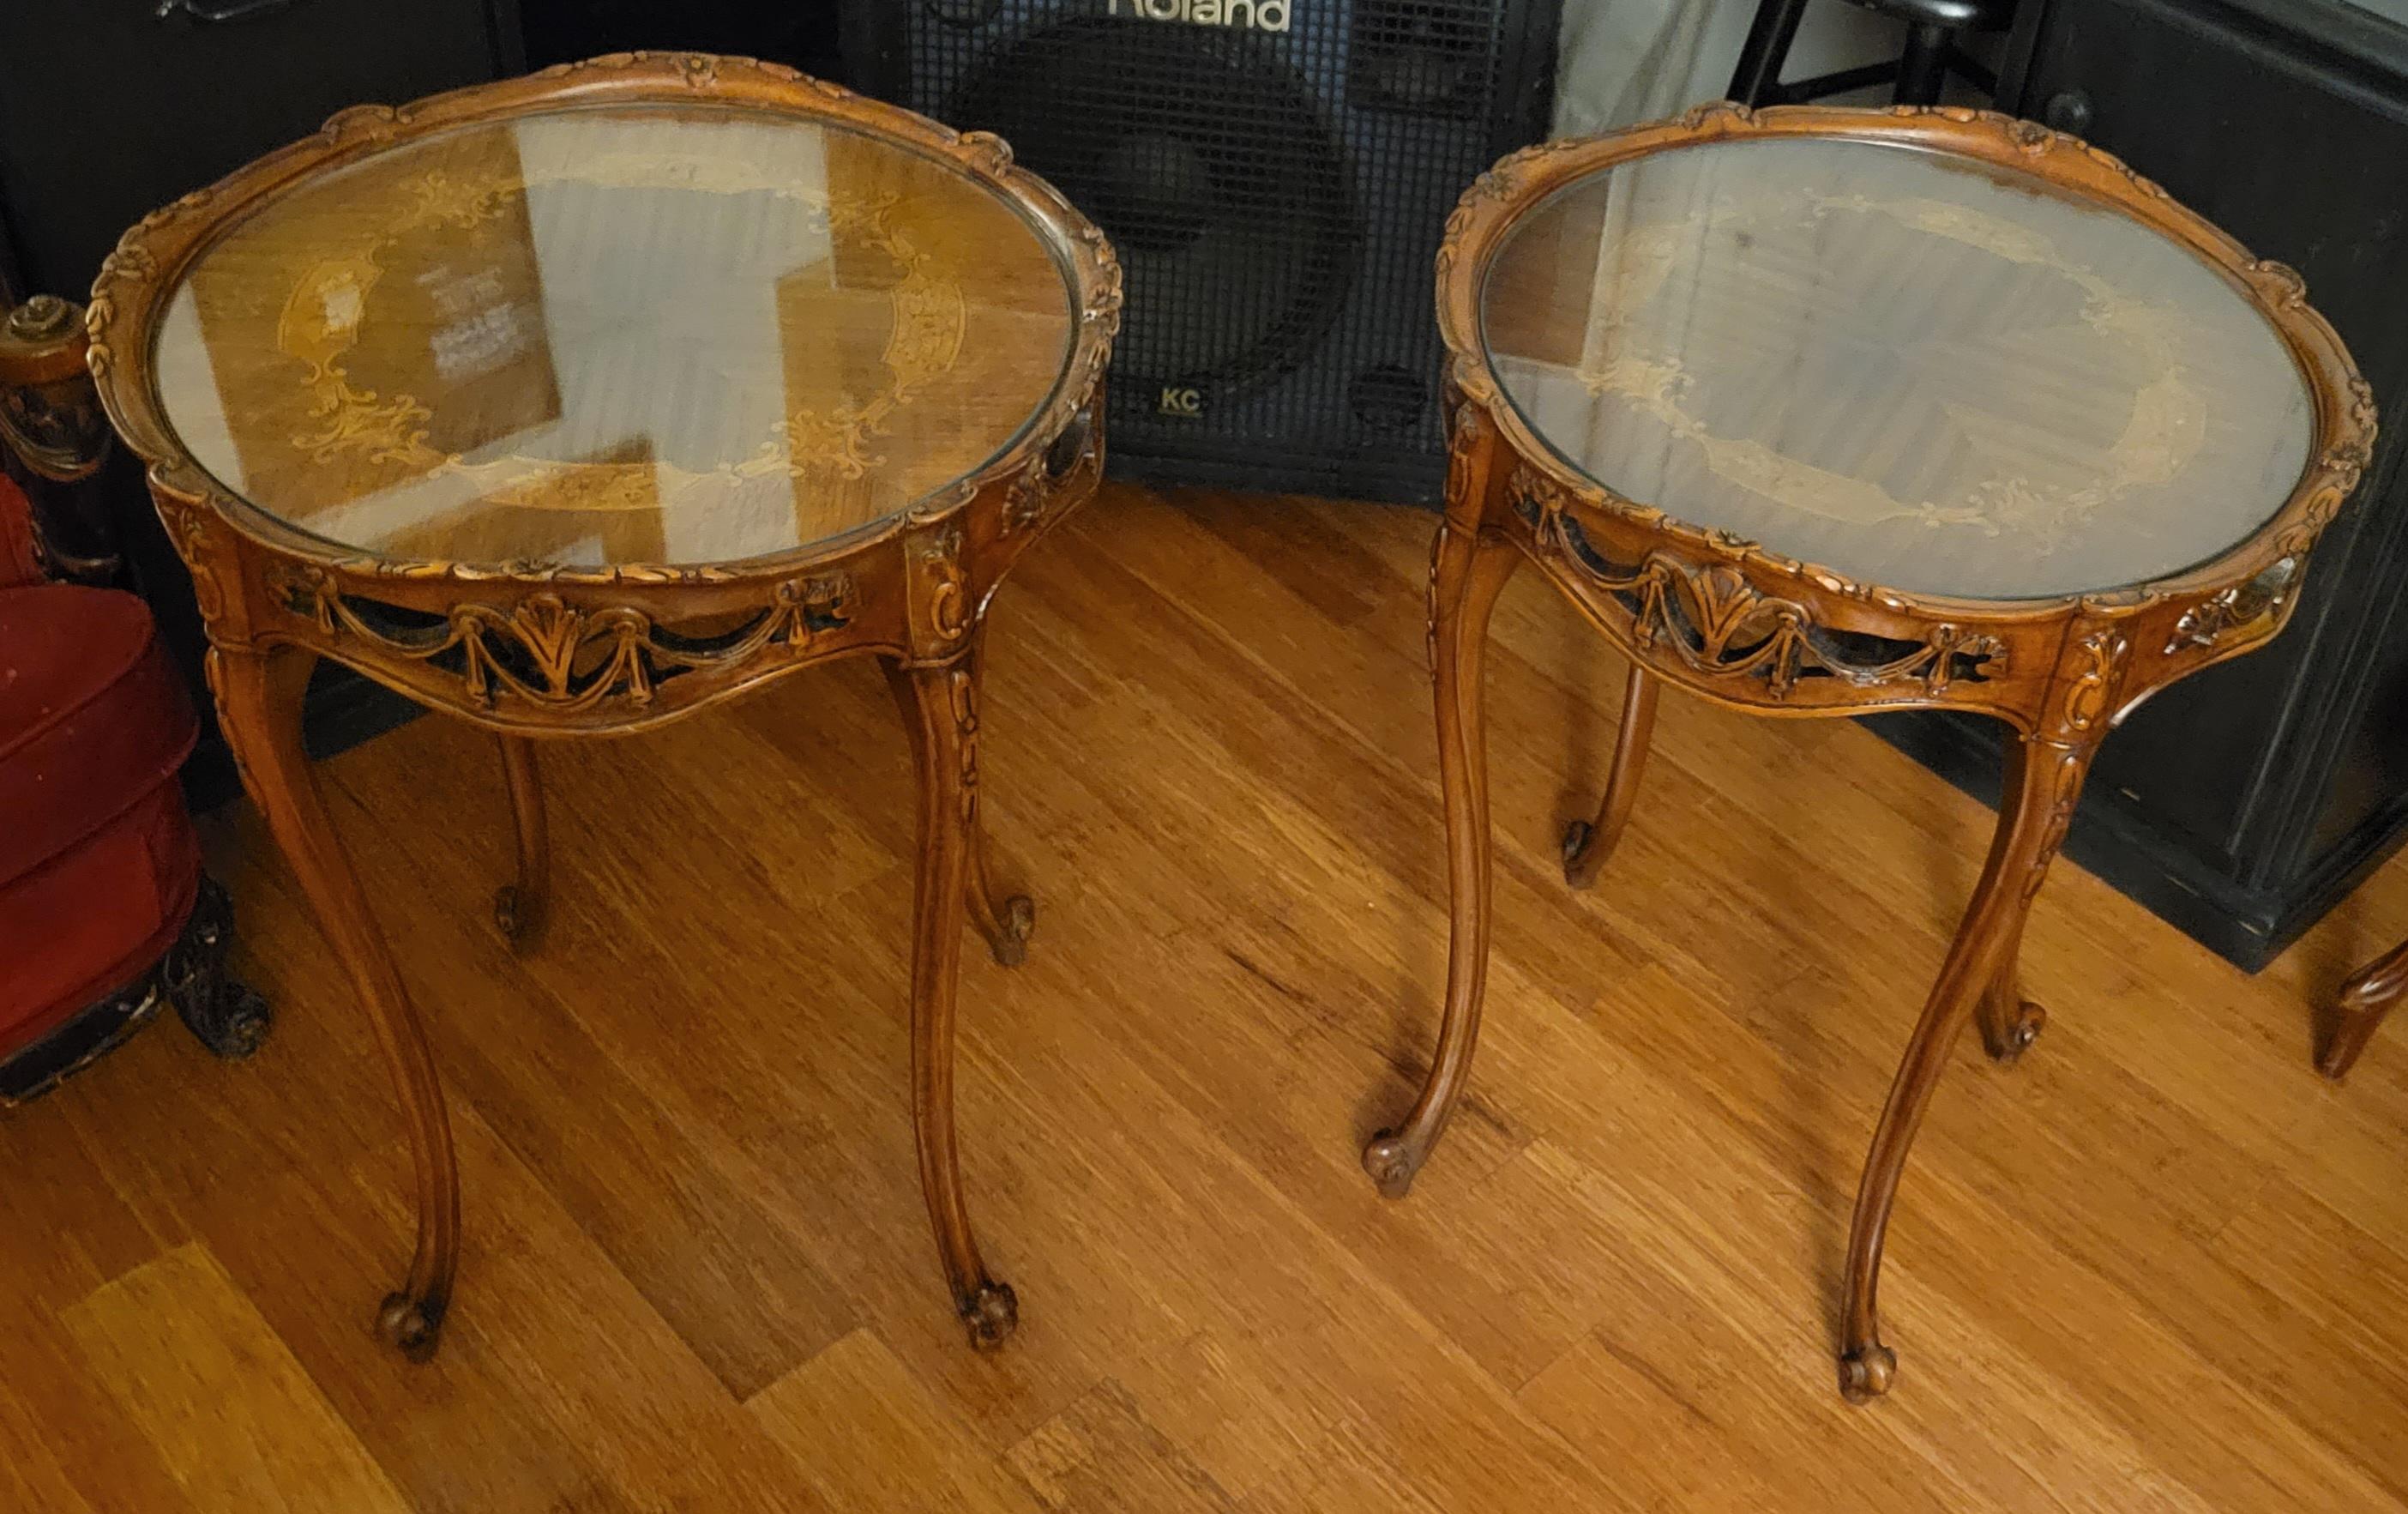 Set of '2' Antique Walnut Hand-Carved Tables with Inlays & Custom Glass For Sale 3